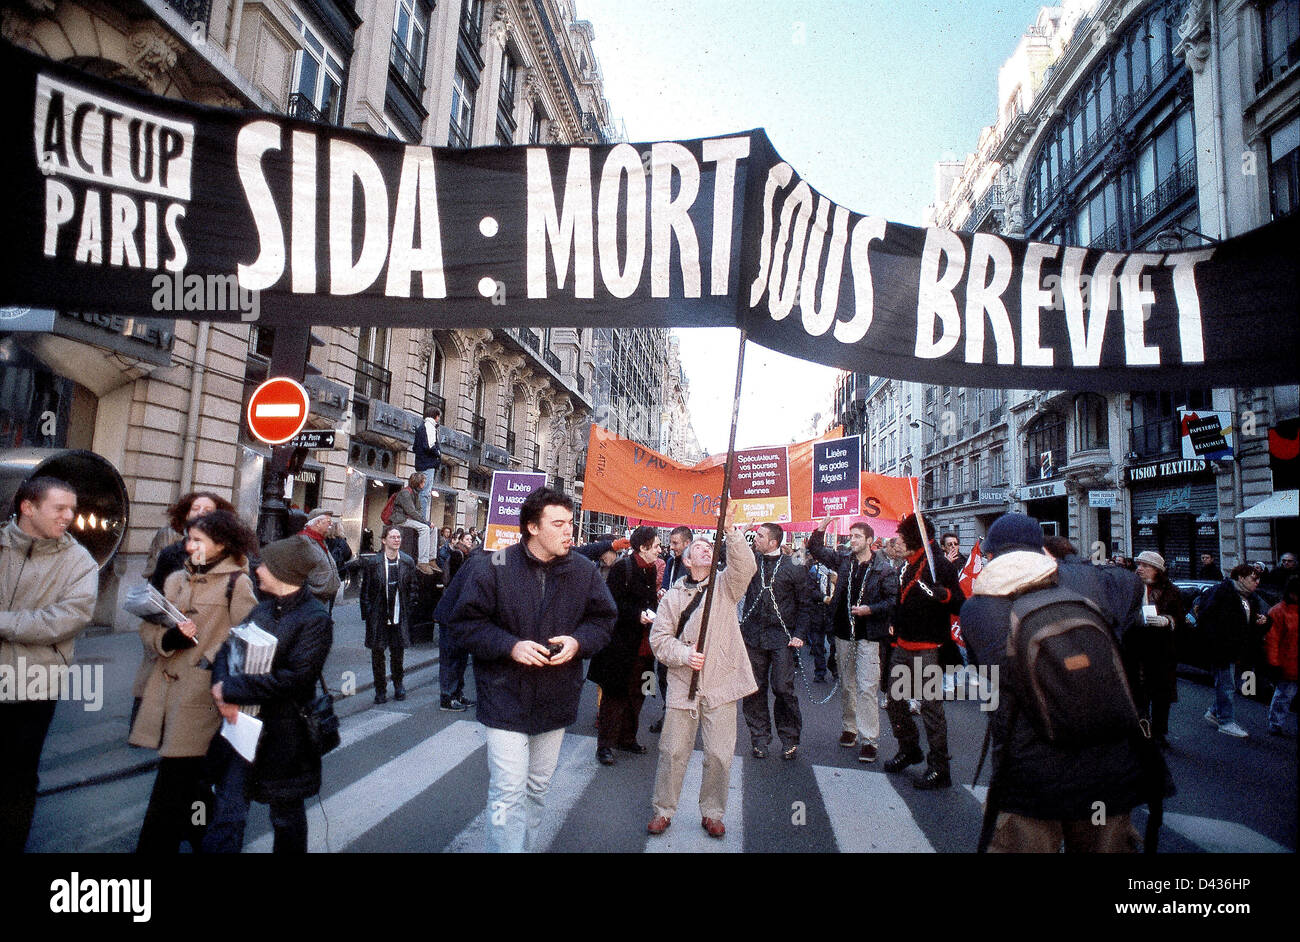 PARIS, France, Act Up-Paris, N.G.O. Association AIDS, HIV, with Banner Reading' AIDS: Death Under Patent' (for funding of Generic Drugs in Developing World), at Anti-Globalisation Demo, Organized by ATTAC Group, big pharma protests, aids activism, demonstration activism france Stock Photo